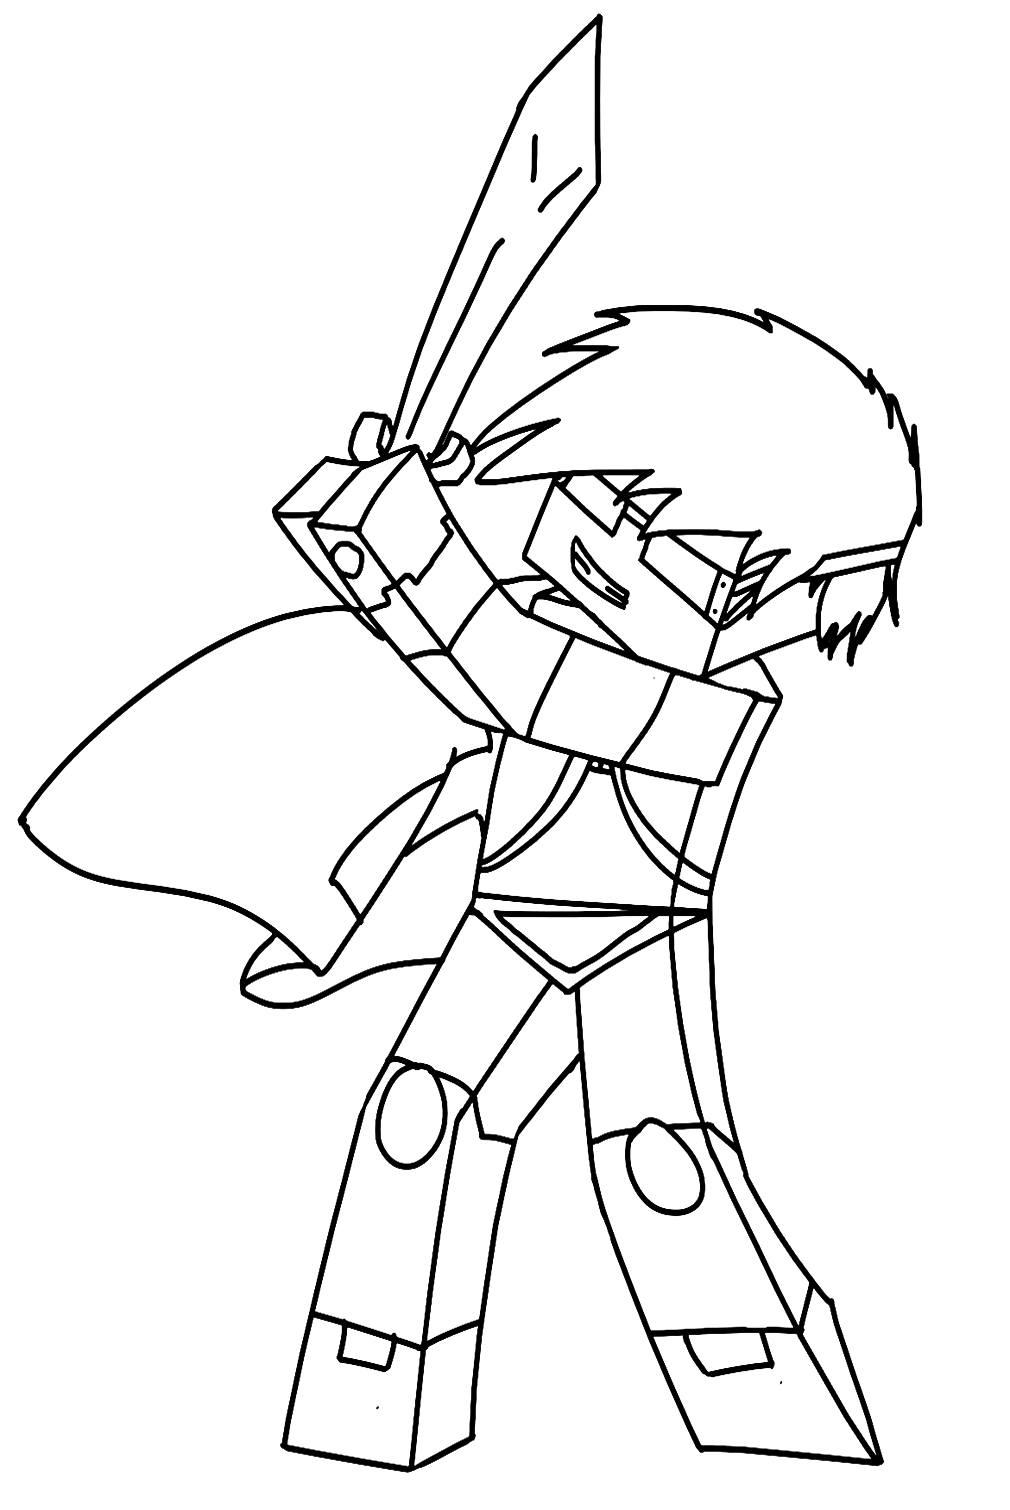 SkyDoesMinecraft From Minecraft Coloring Pages